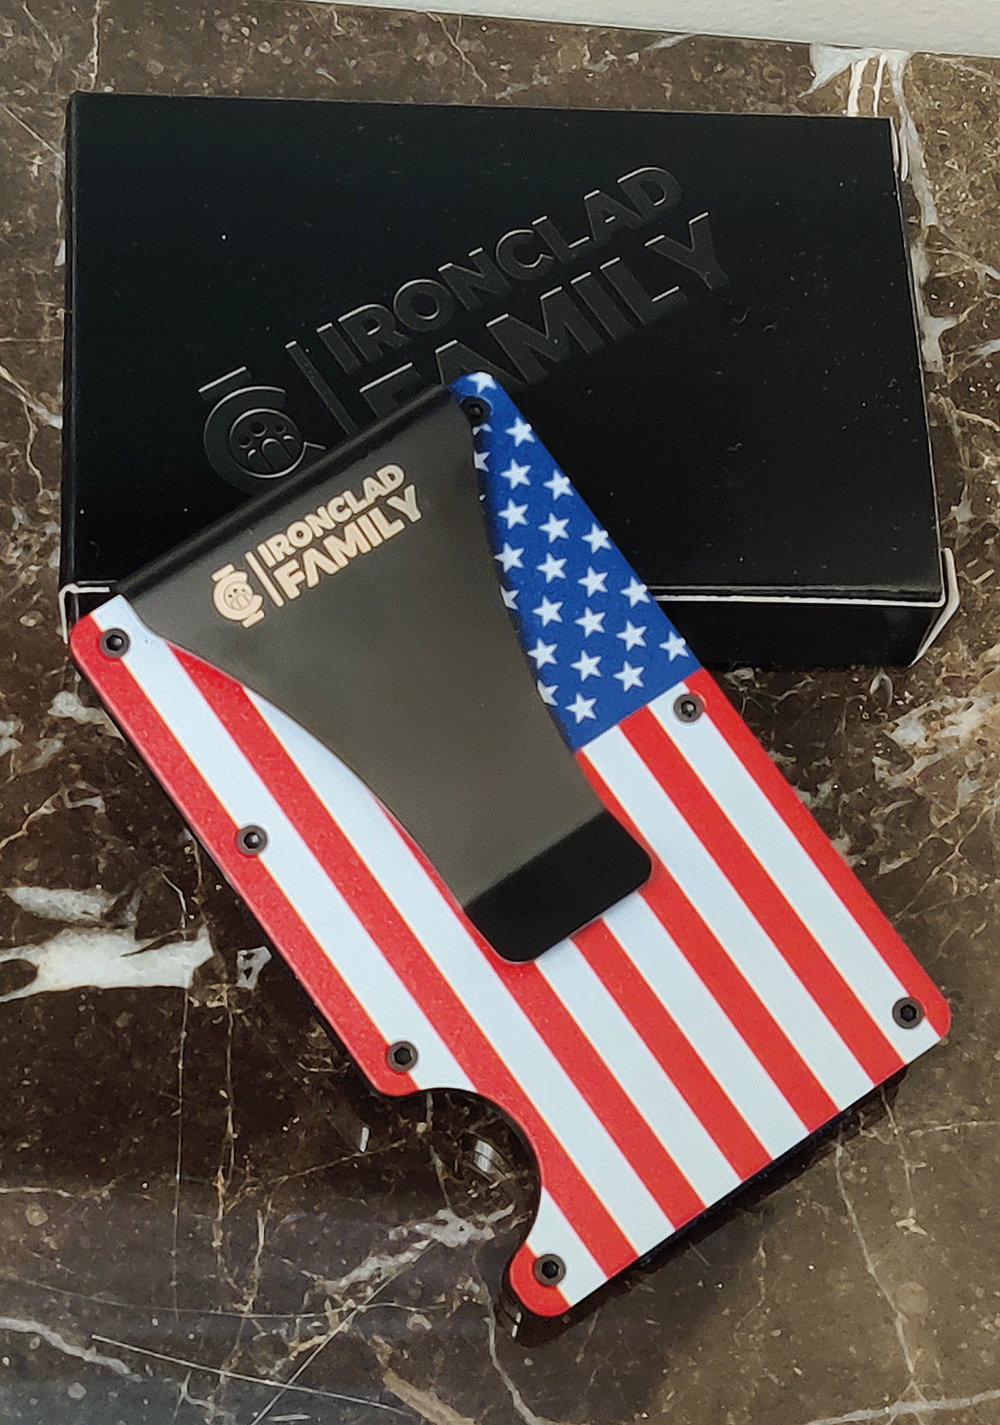 Packaged American flag design credit card holder with RFID blocking capability